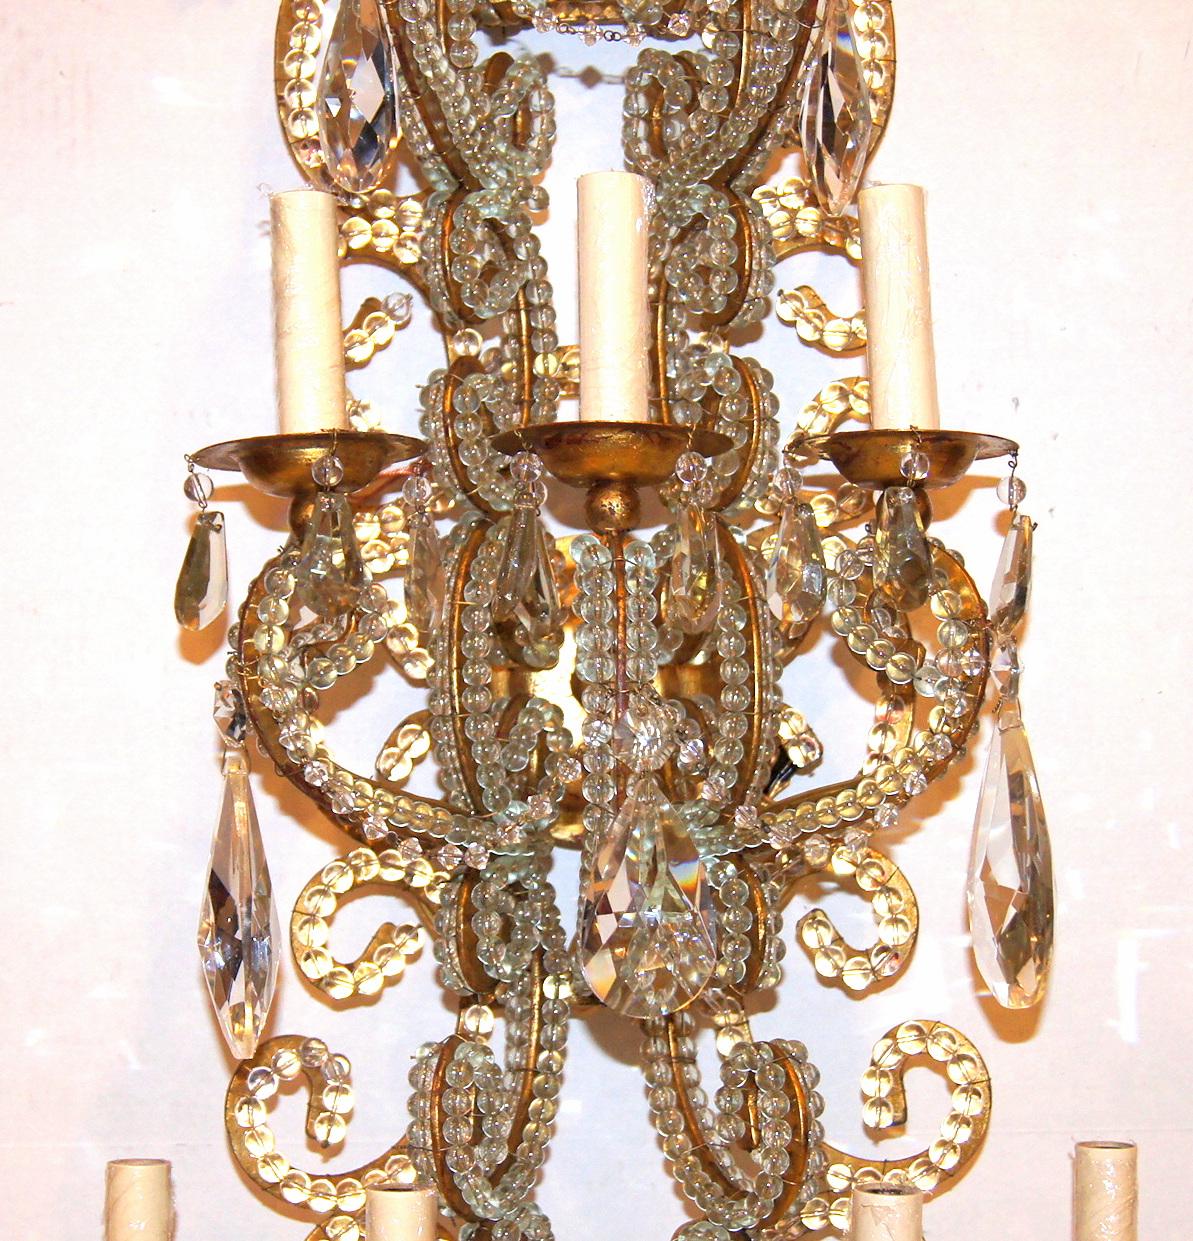 Set of four large circa 1940's Italian gilt metal and crystal nine-arm sconces with original patina. Sold in pairs.

Measurements:
Height: 41.5